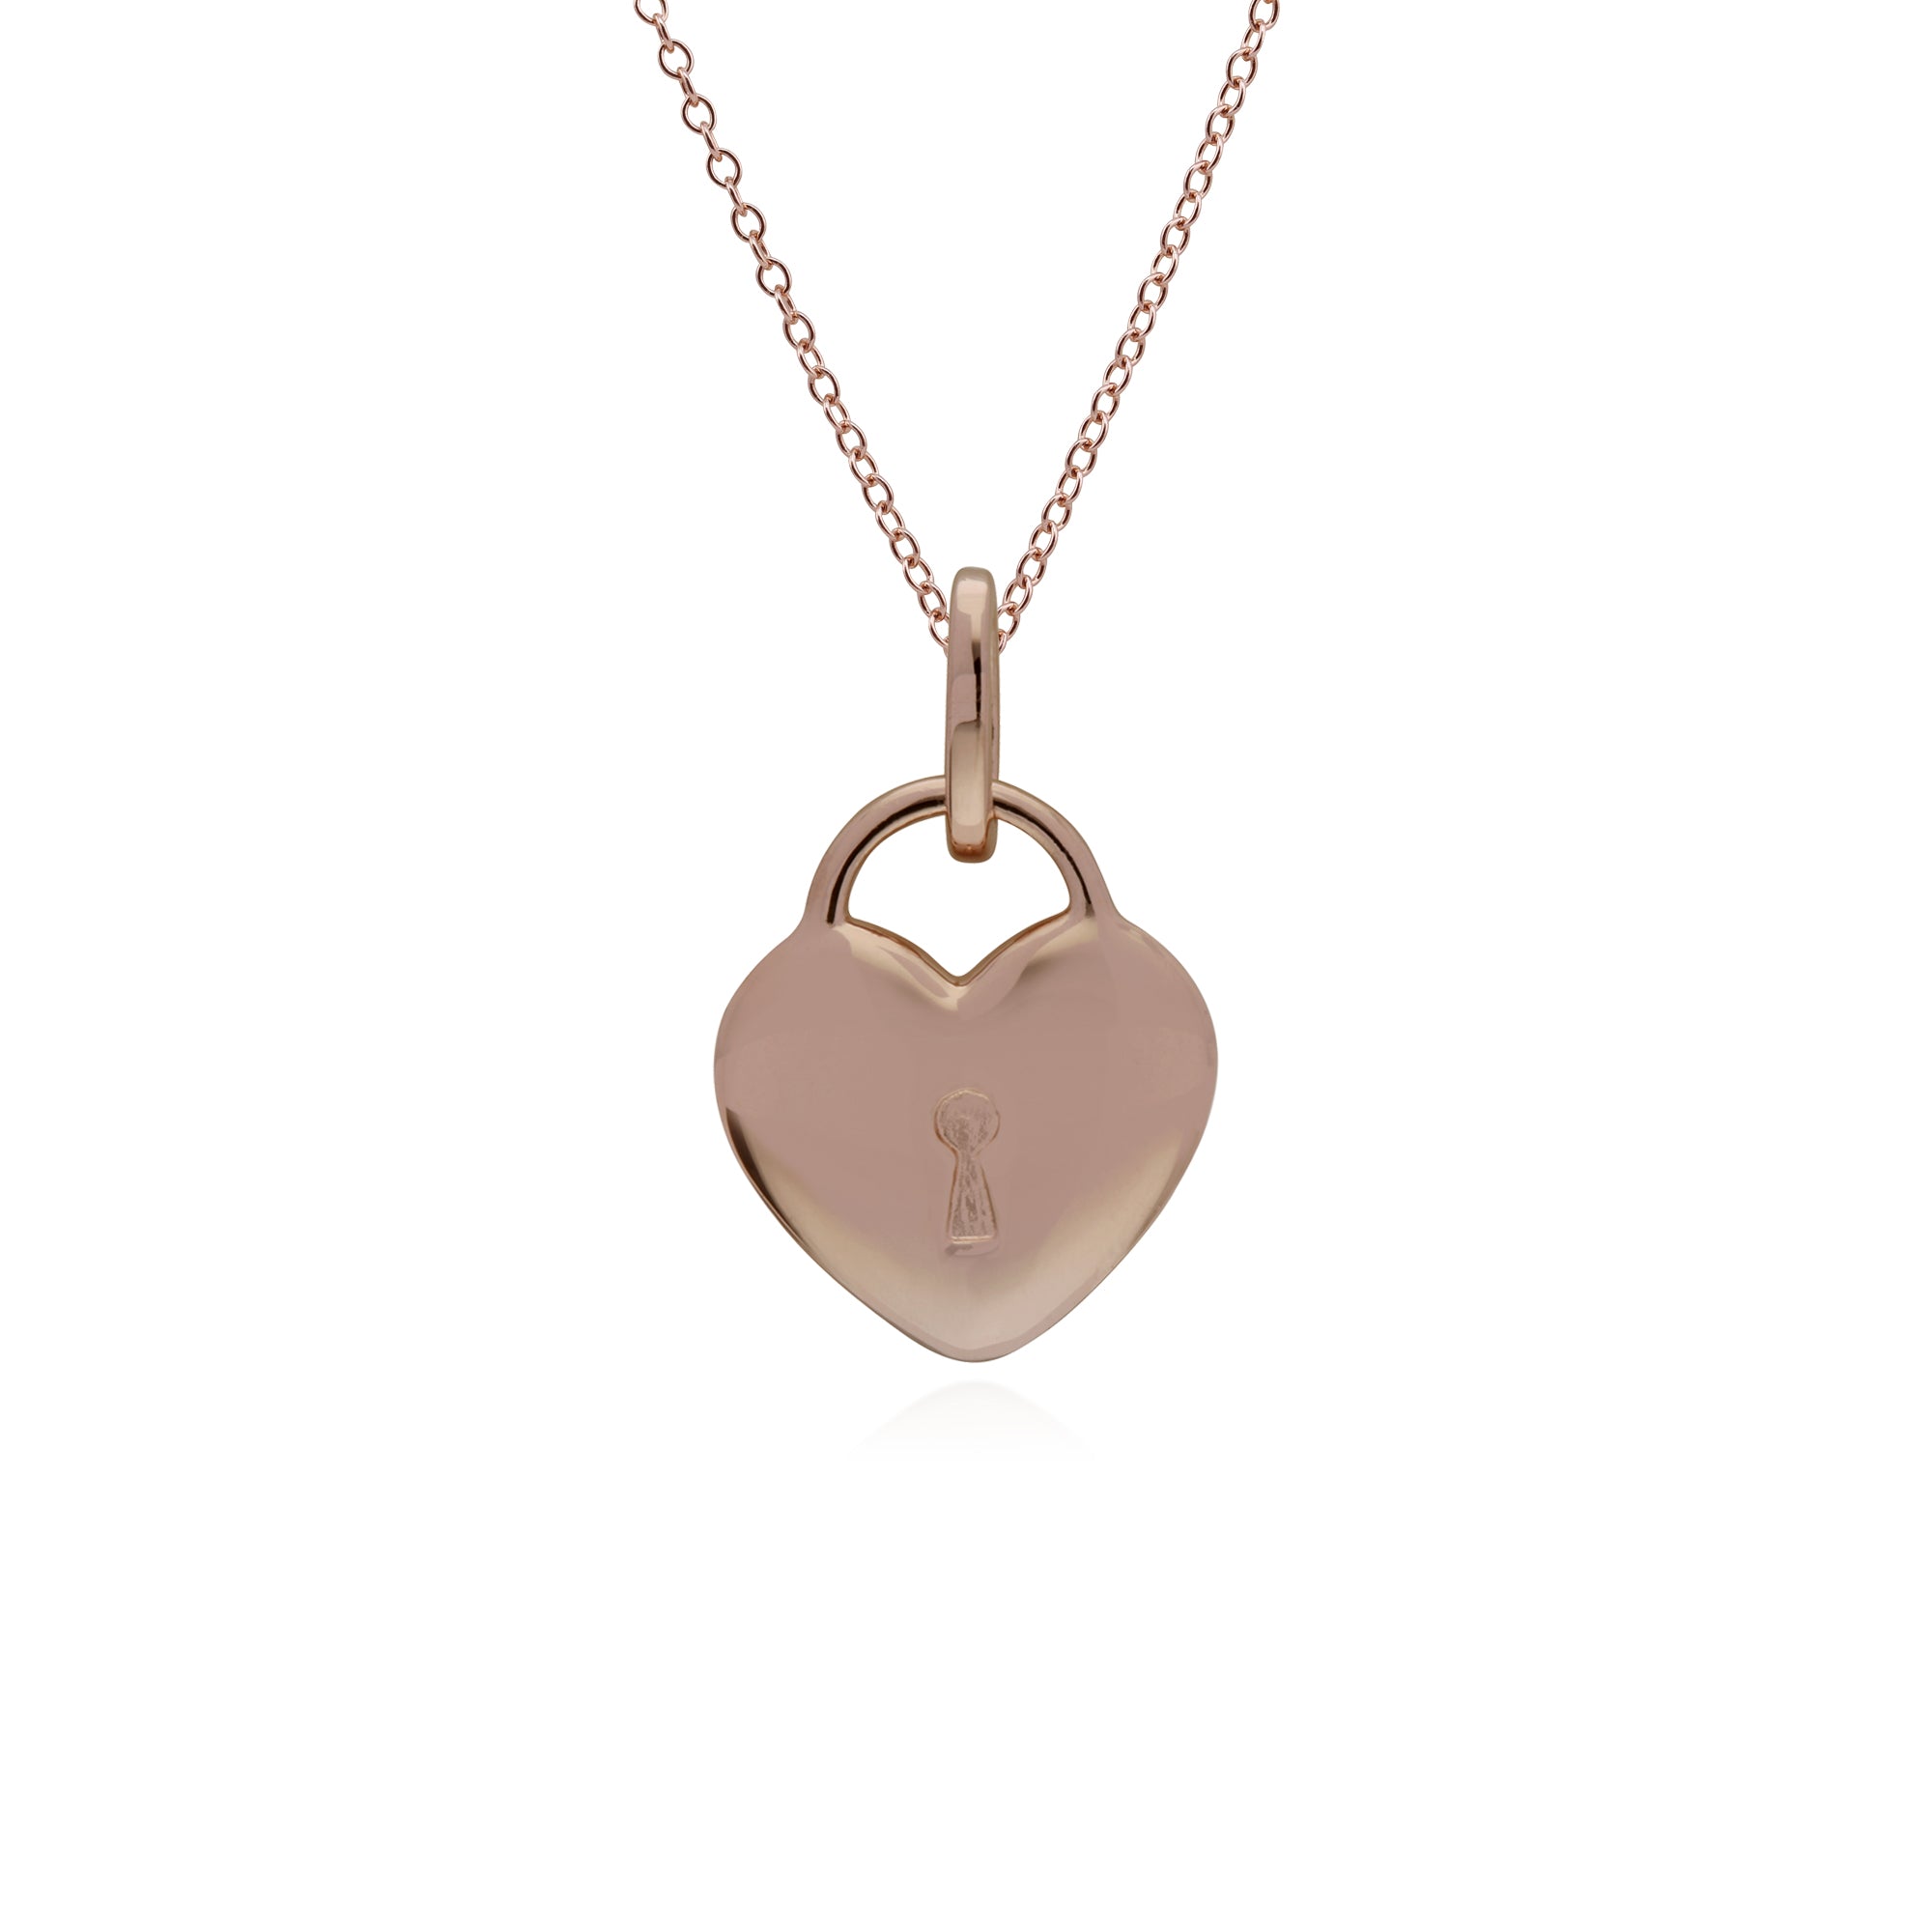 270P027306925-270P026901925 Classic Heart Lock Pendant & Tanzanite Charm in Rose Gold Plated 925 Sterling Silver 3